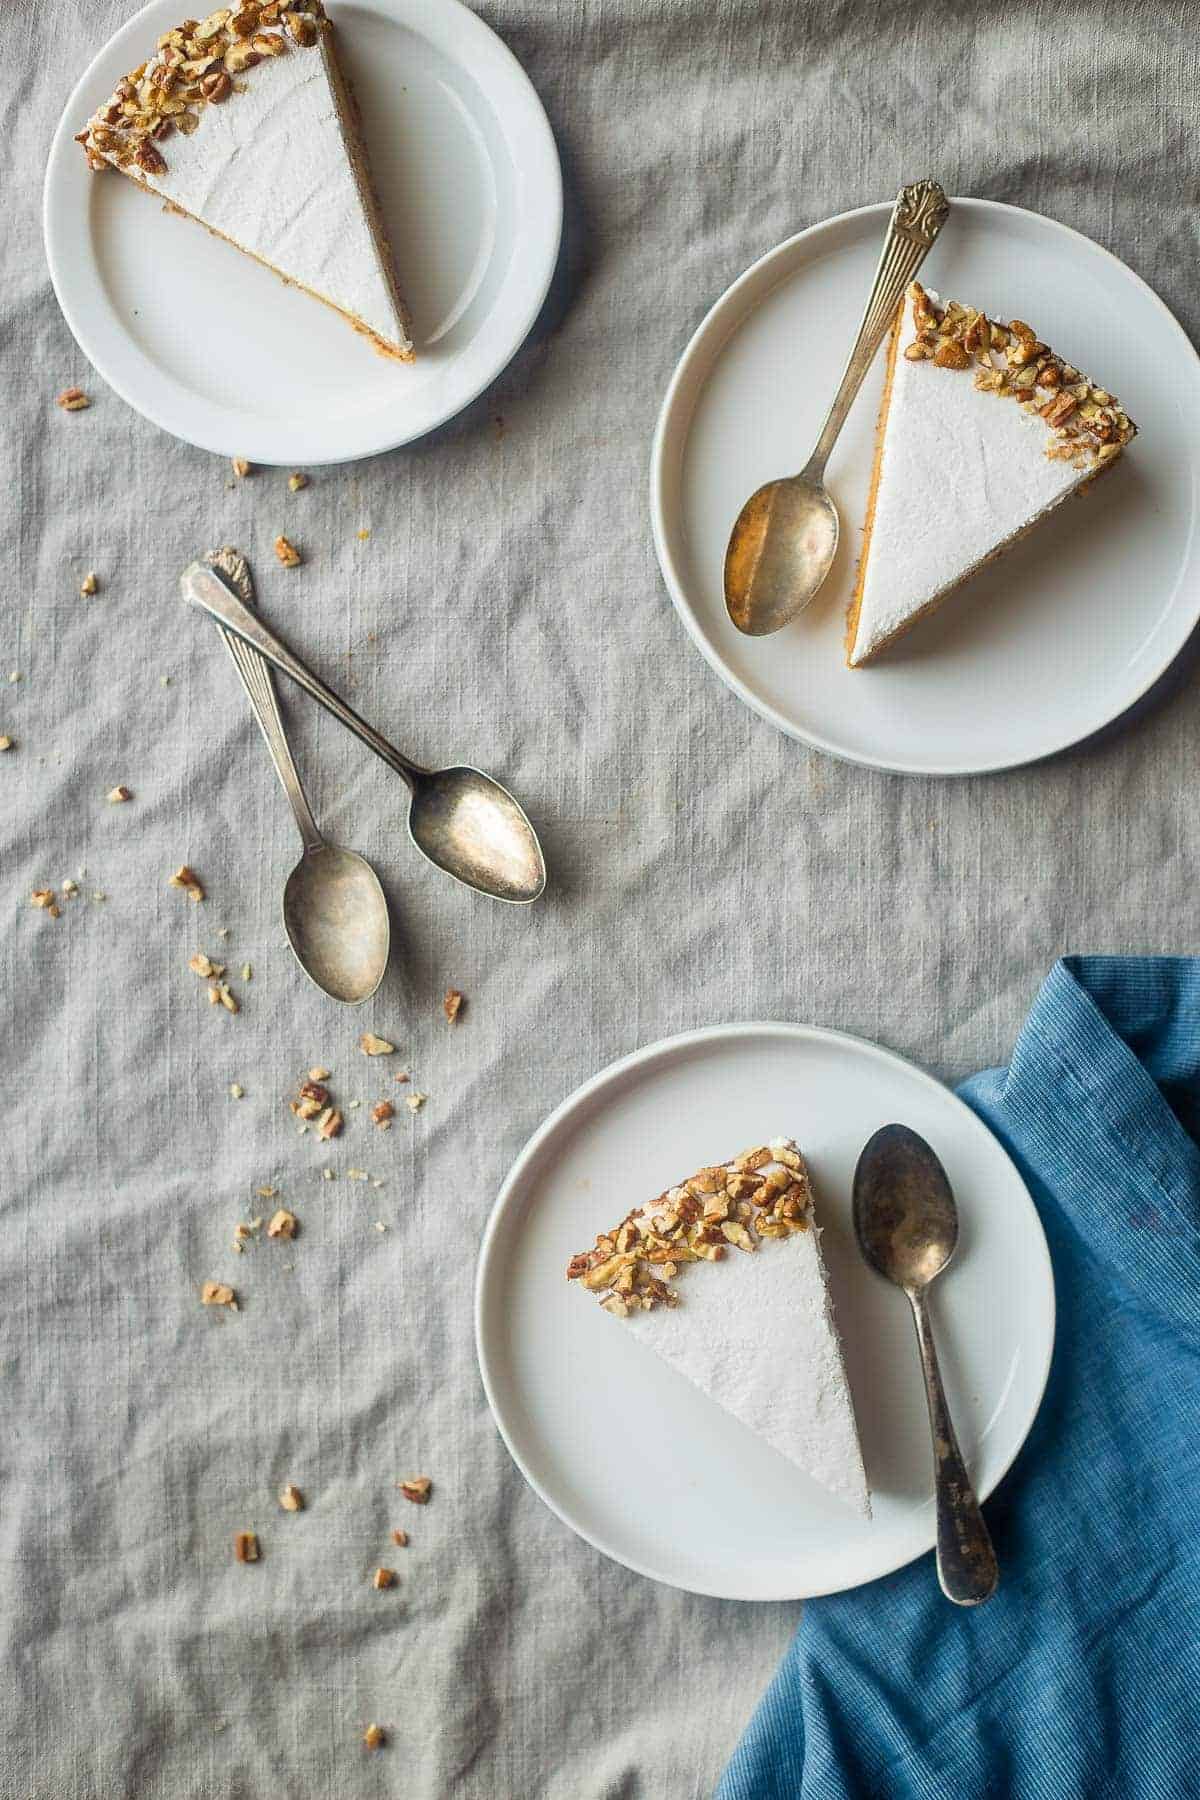 Gluten Free Paleo And Vegan Carrot Cake Cheesecake - This super easy, rich, creamy, paleo and vegan friendly cheesecake tastes like carrot cake but is secretly dairy, gluten, egg and refined sugar free and healthy! Perfect for Easter! | Foodfaithfitness.com | @FoodFaithFit